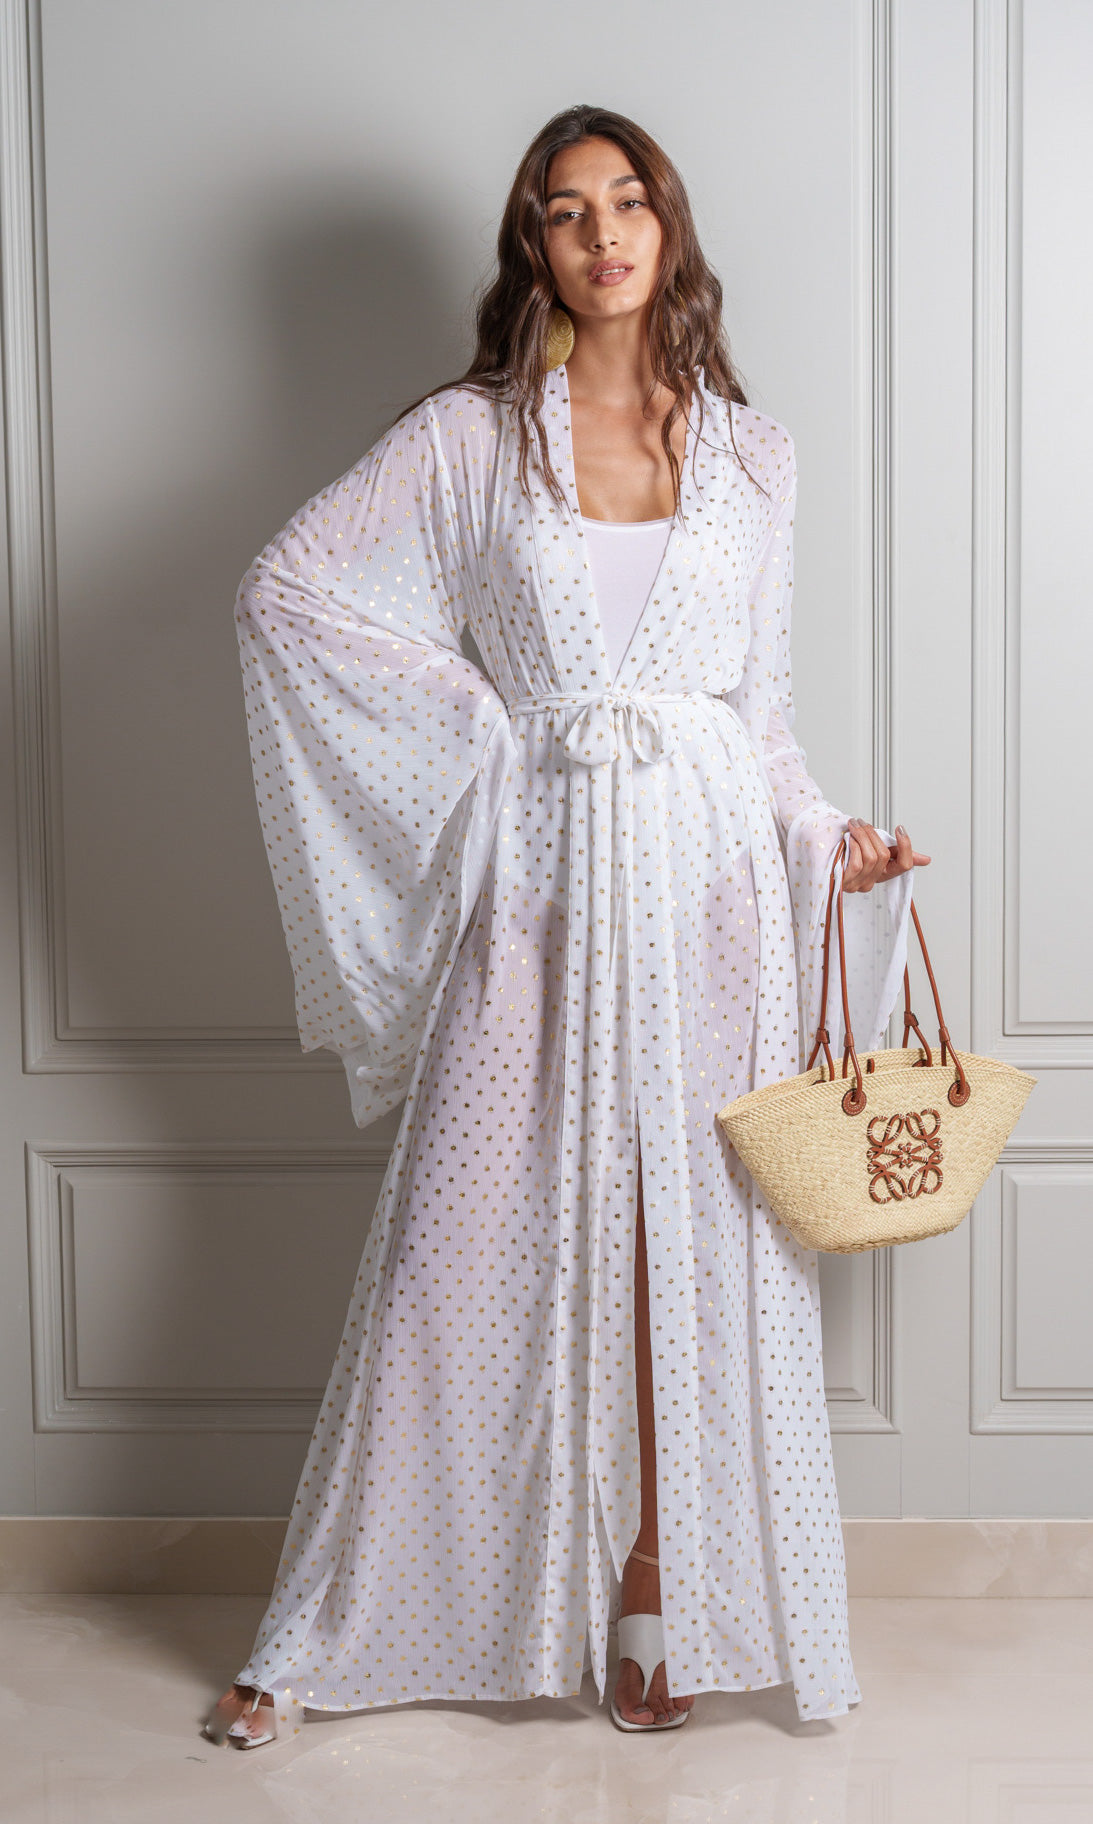 Model wears opulent white kimono crafted from a luxurious chiffon fabric with gold polka dot detailing